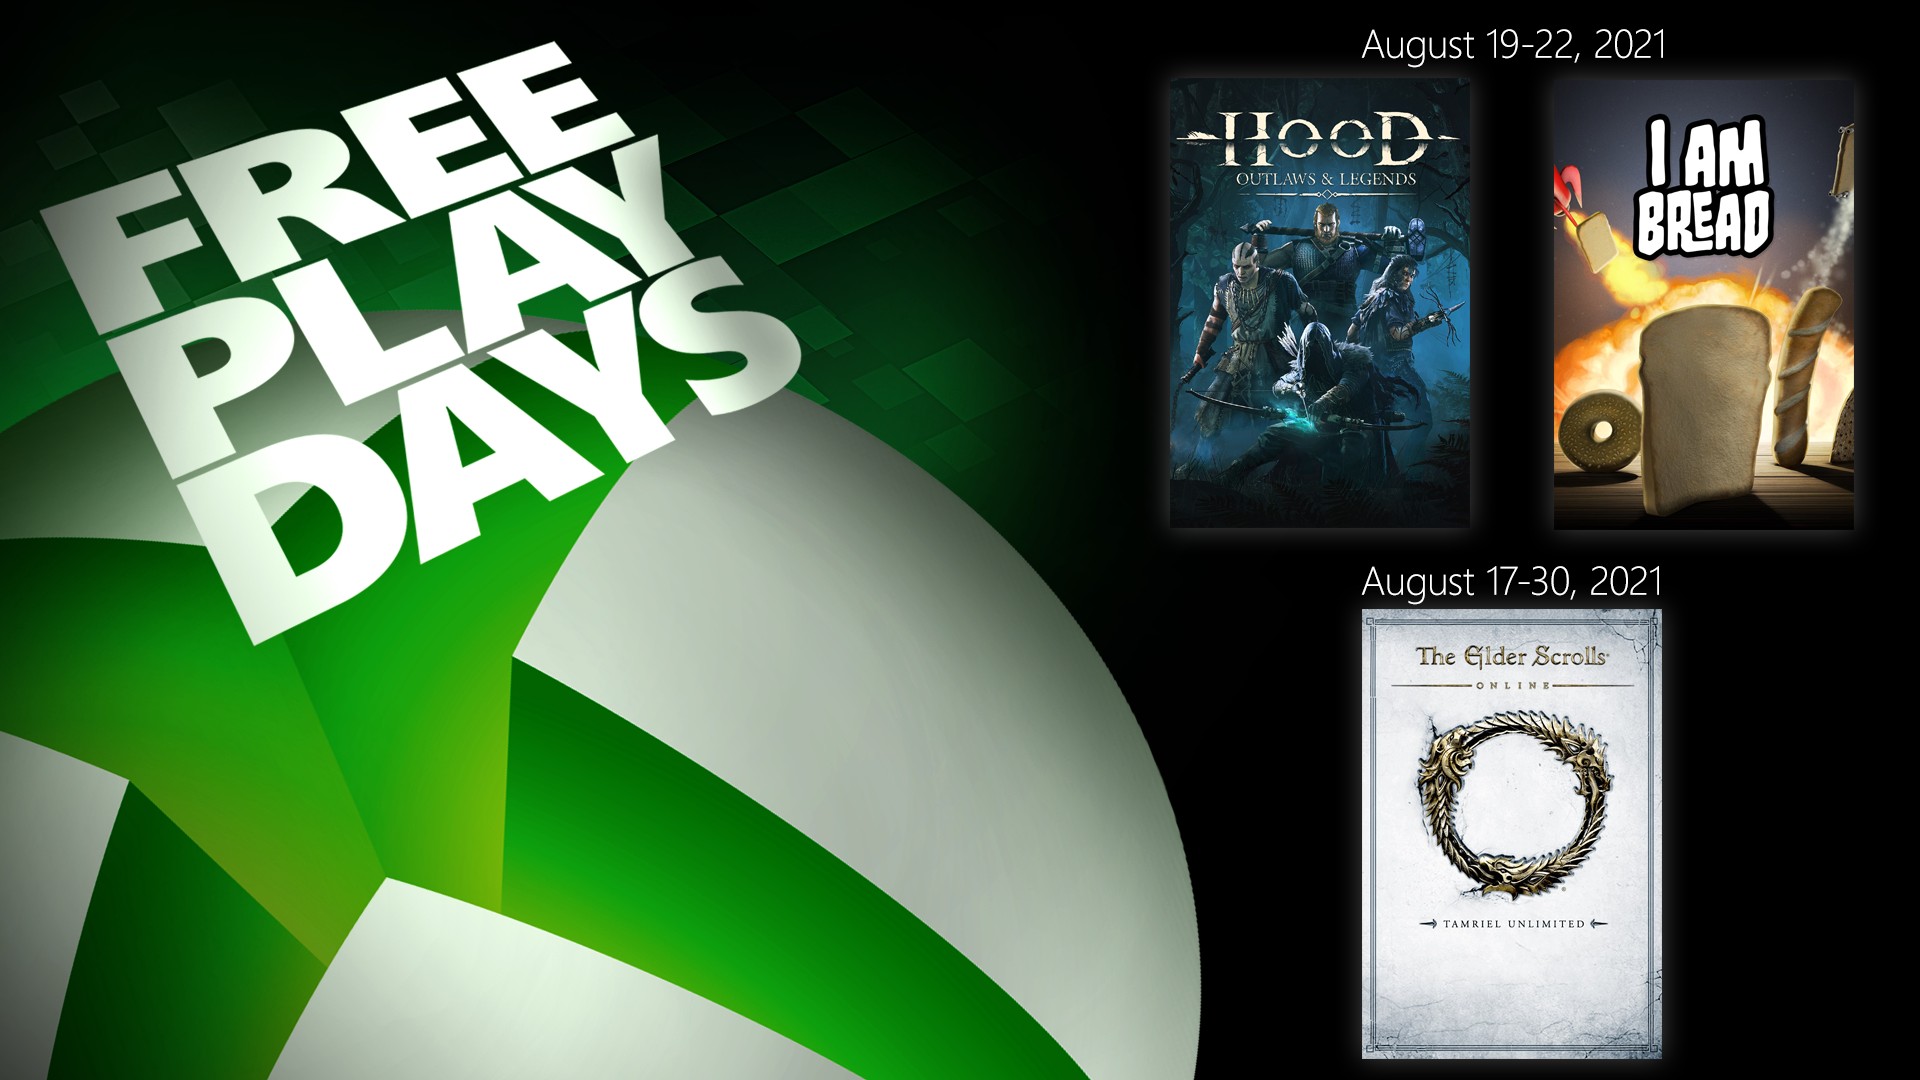 Free Play Days - August 19